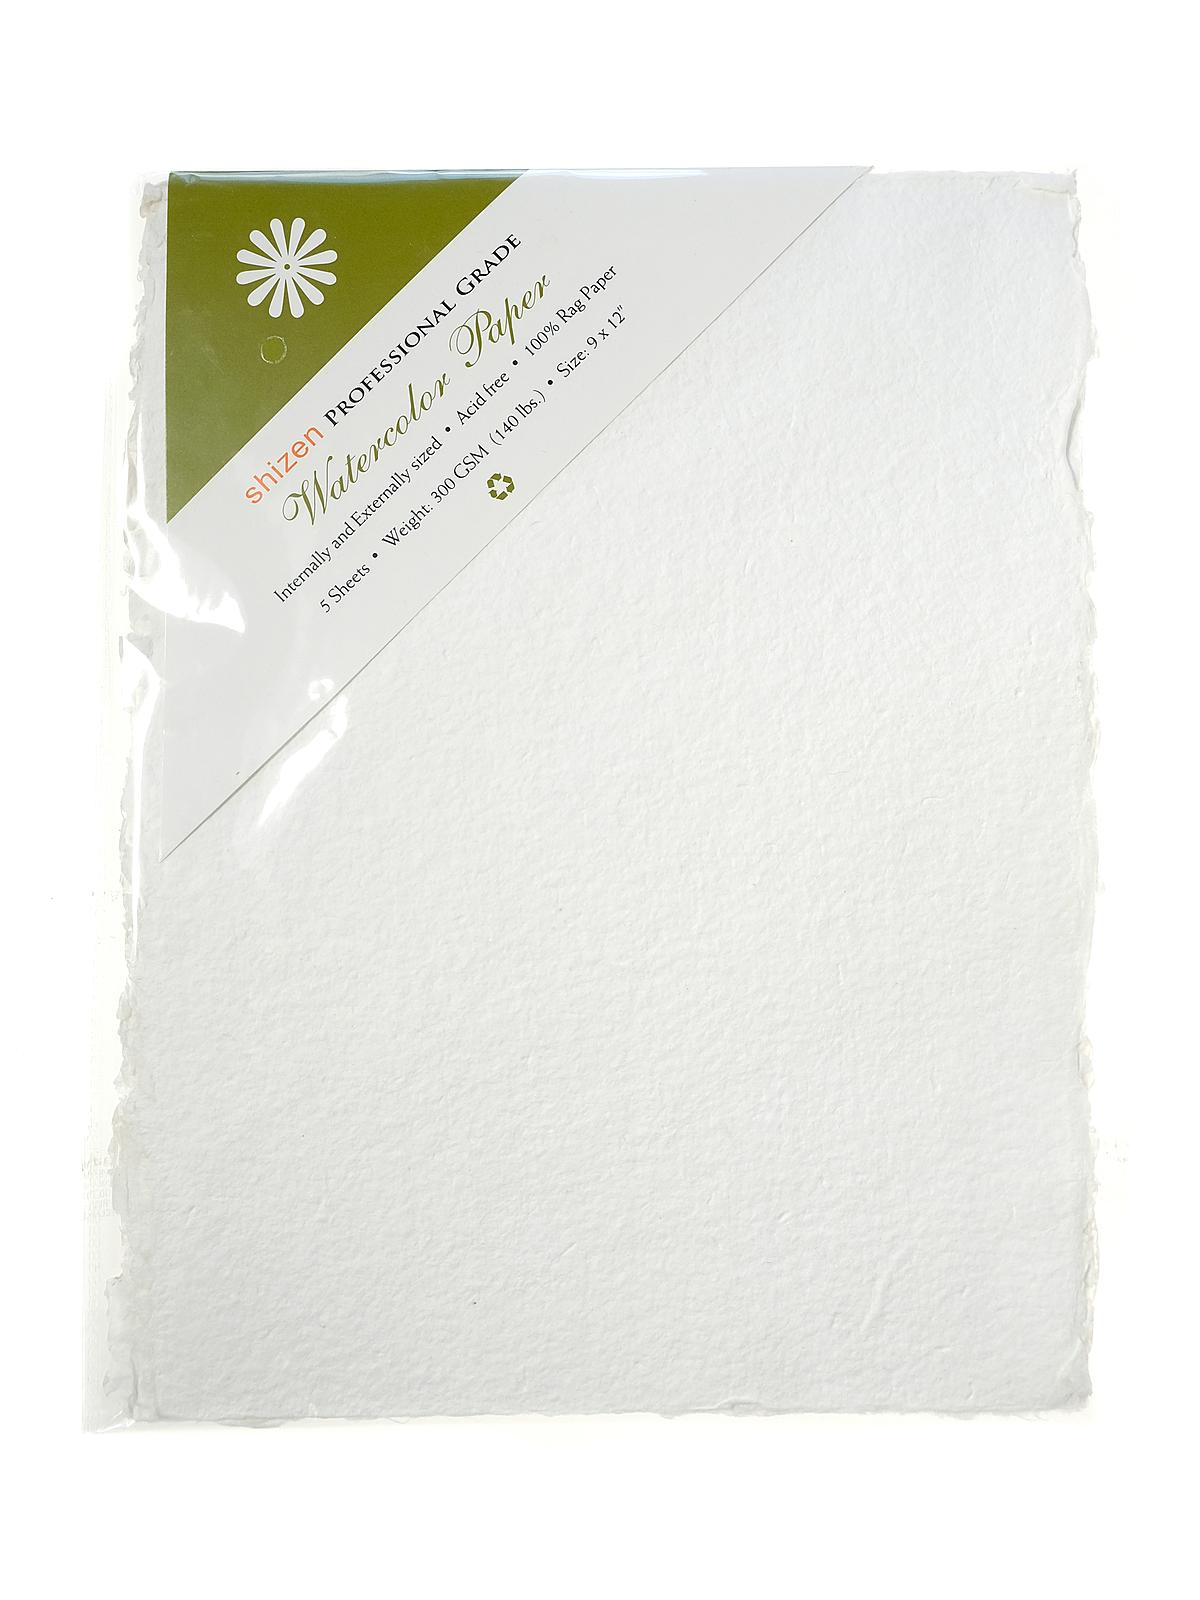 Professional Grade Watercolor Paper 9 In. X 12 In. Deckle Edges Pack Of 5